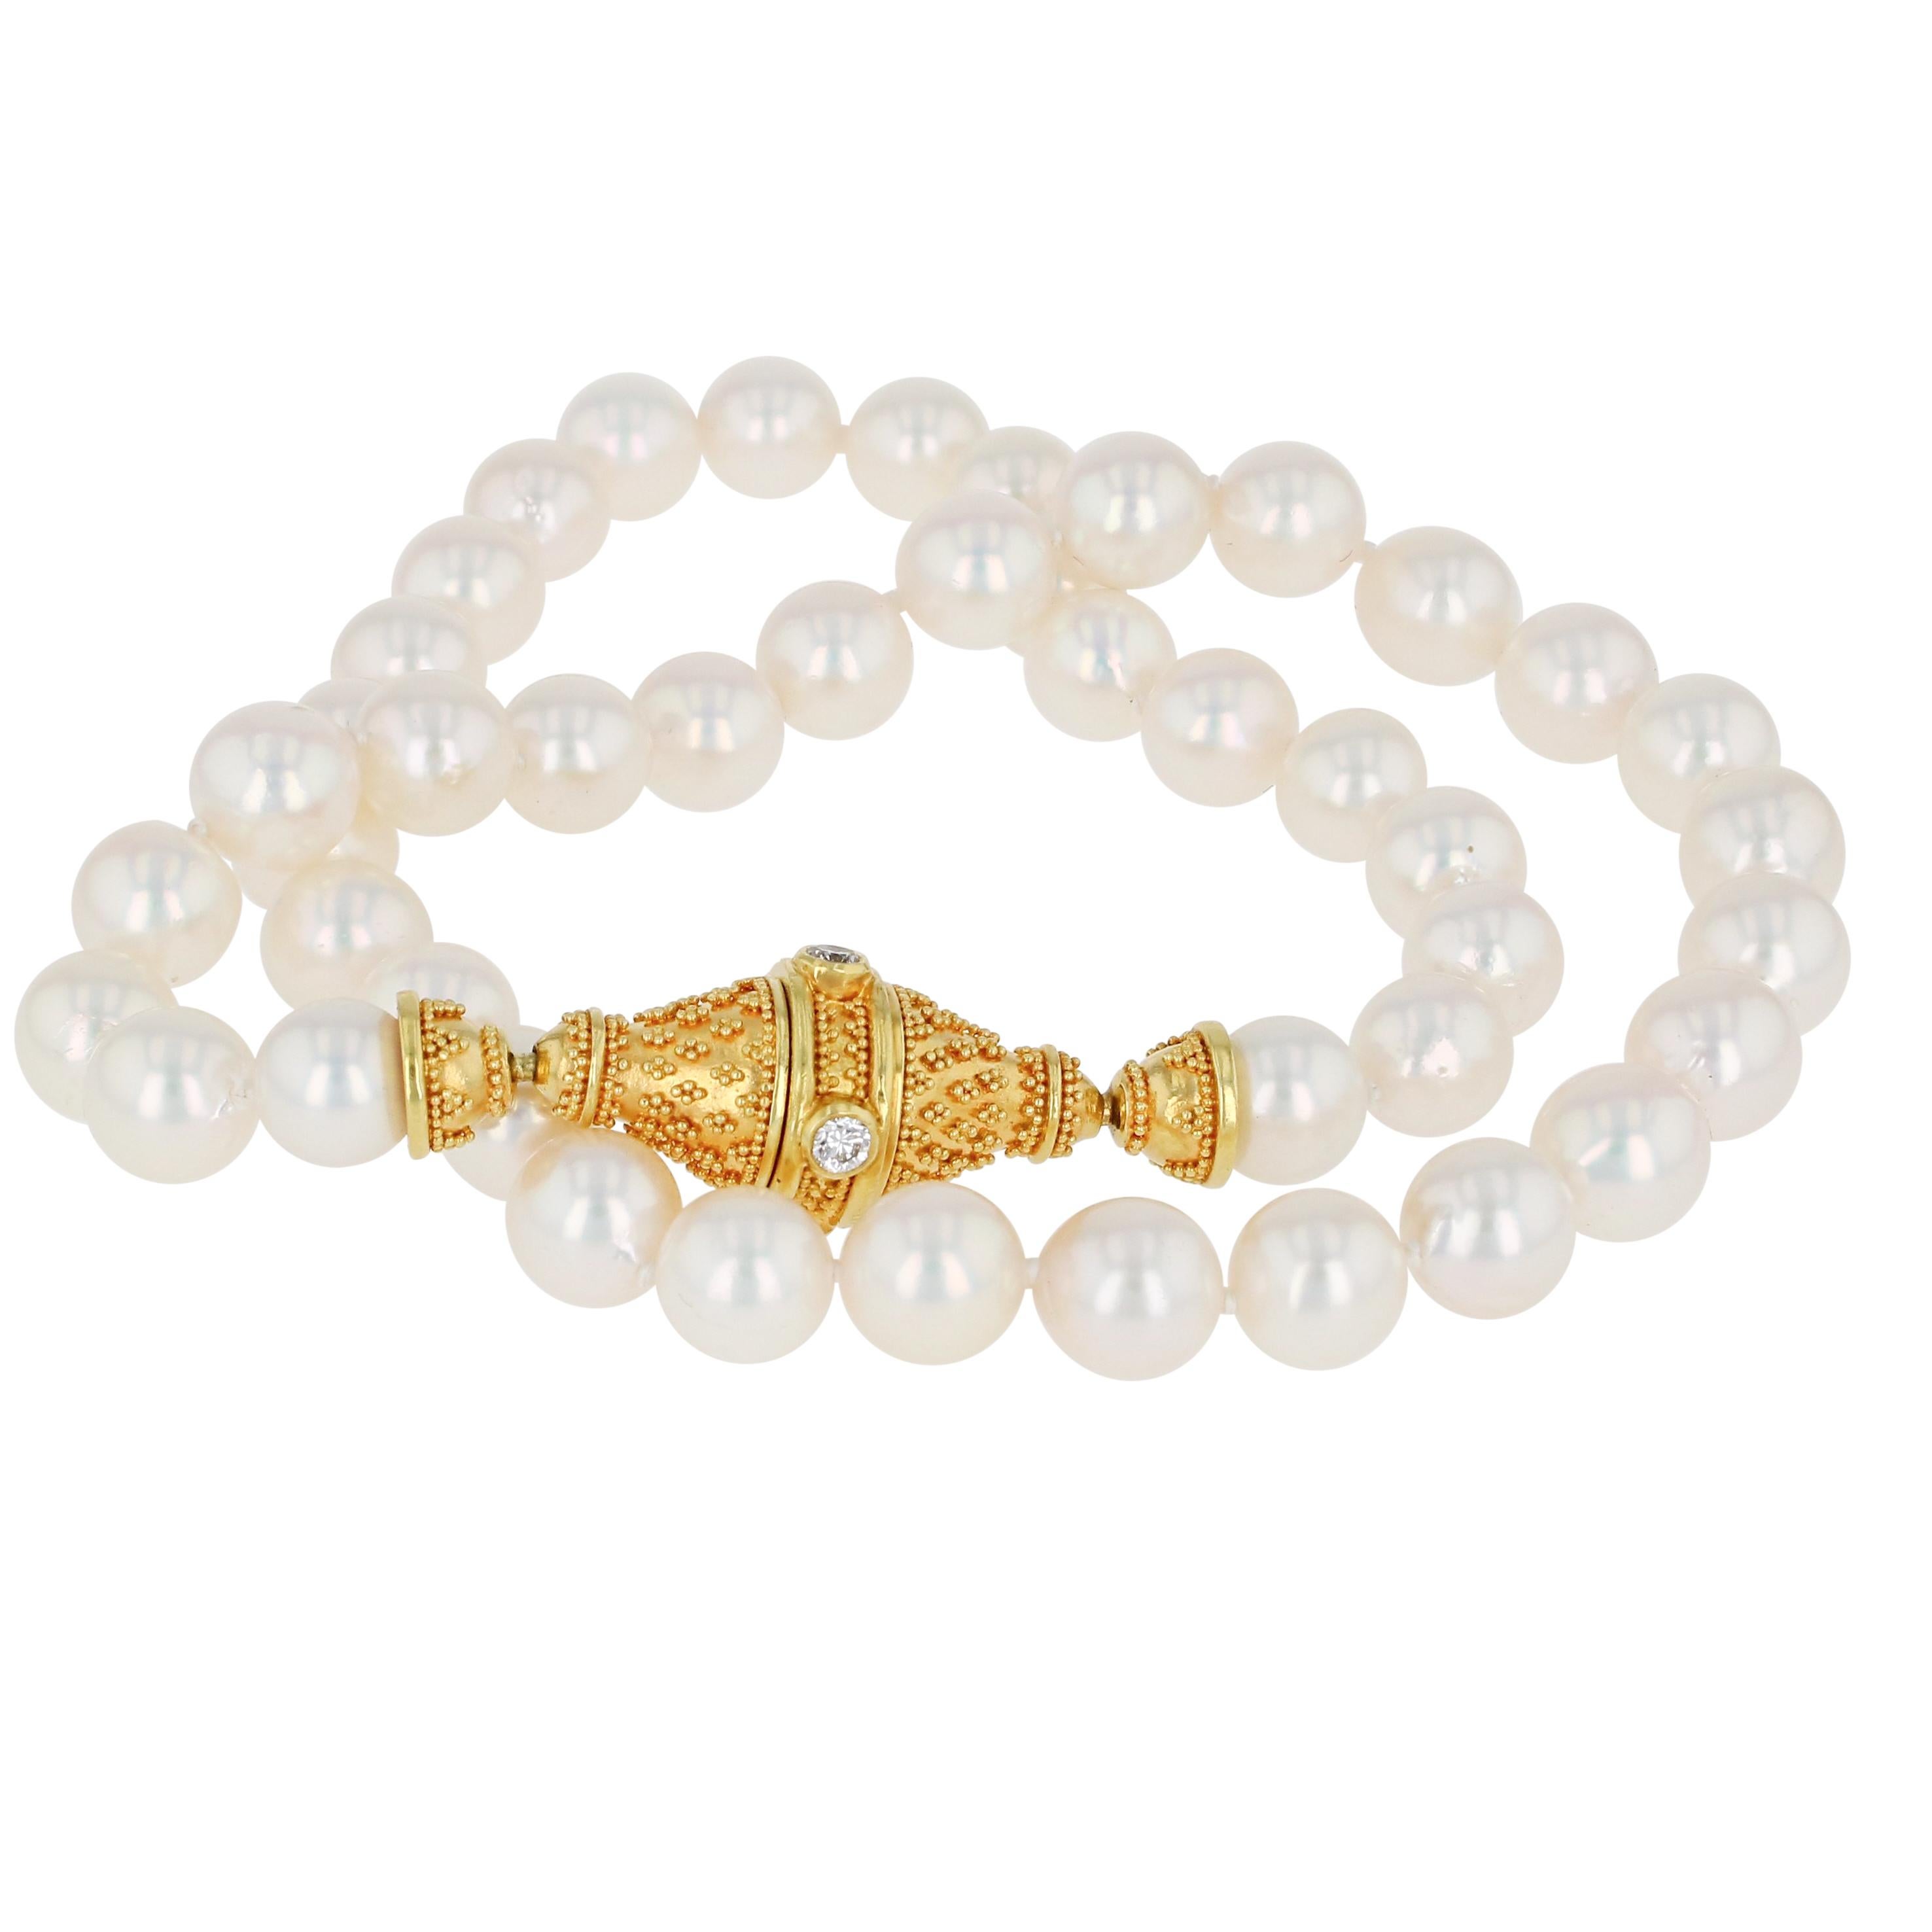 Kent Raible Akoya Pearl Necklace, 18 K Gold and Diamond clasp with Granulation For Sale 1